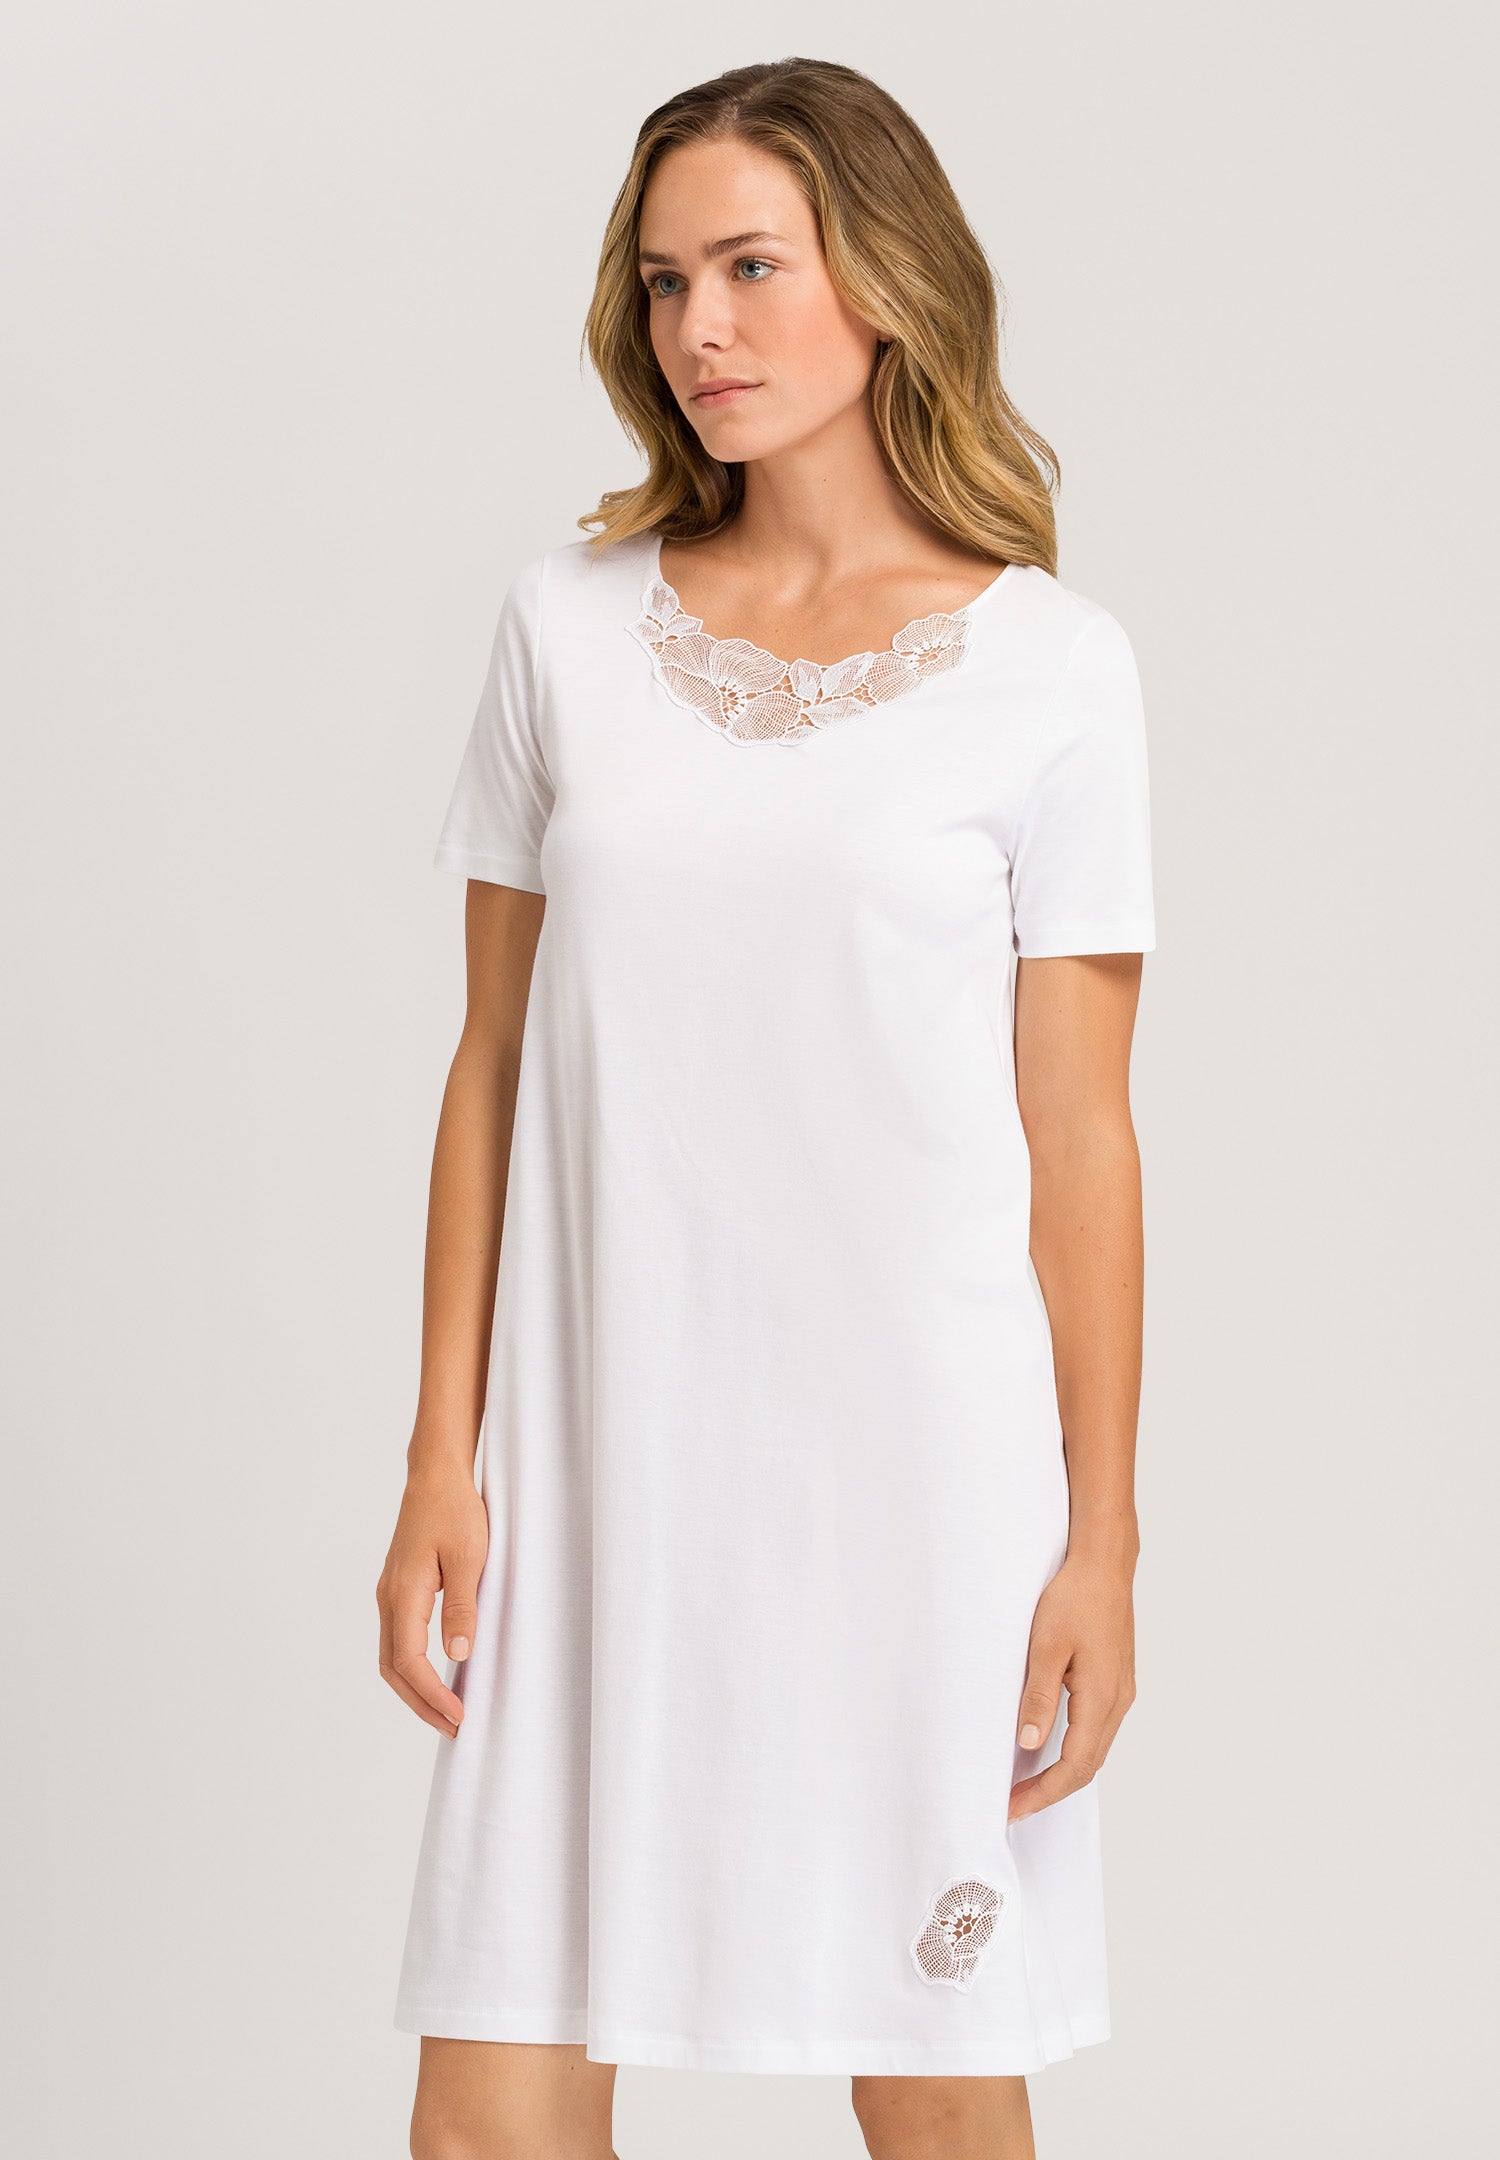 76047 Paola Short Sleeve Nightgown - 101 White